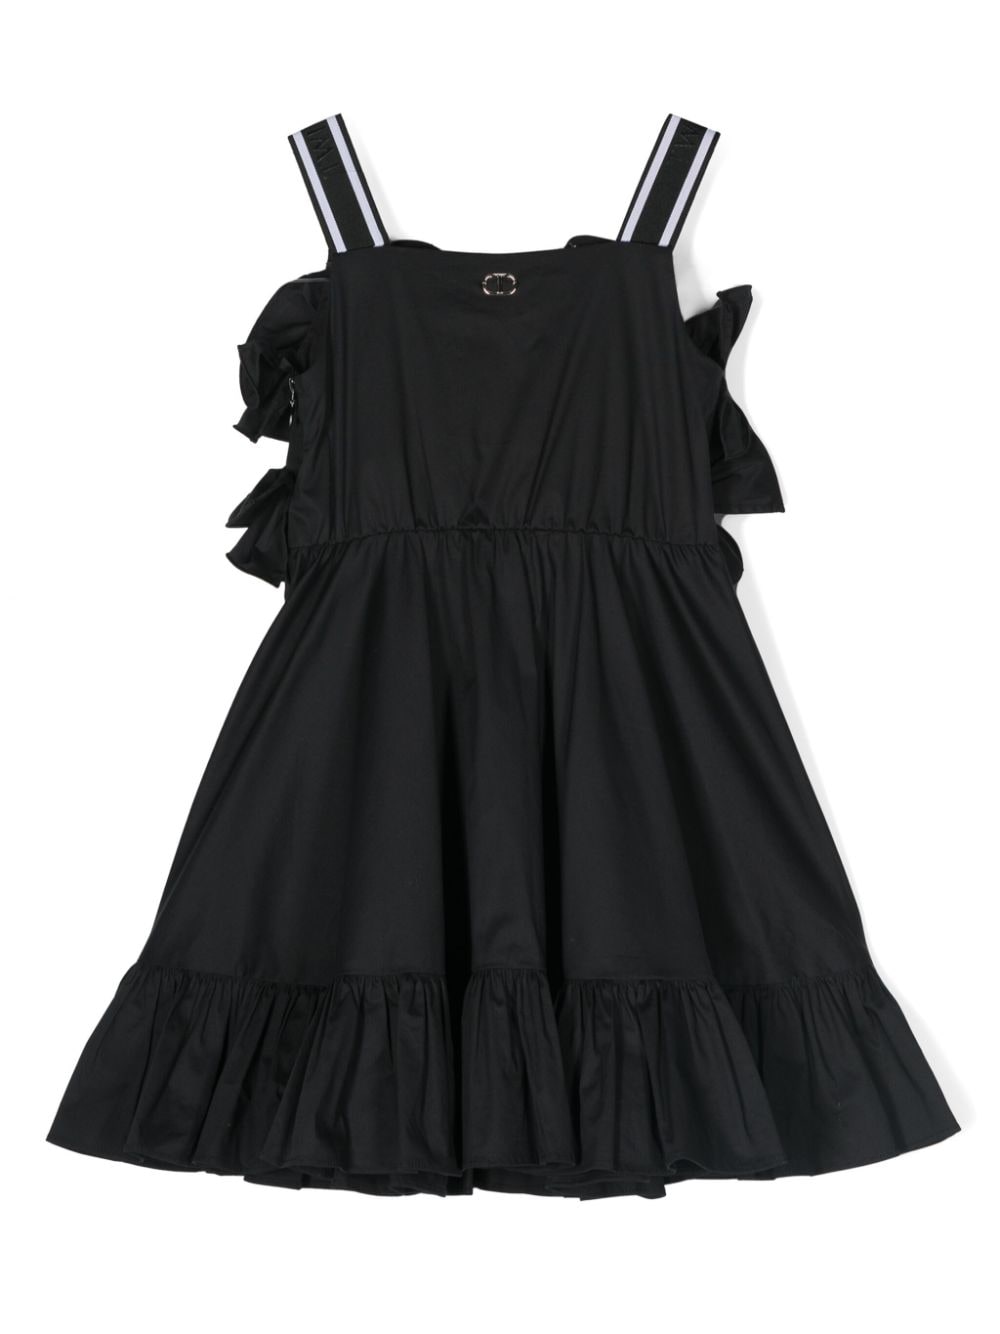 Black dress for girls with ruffles